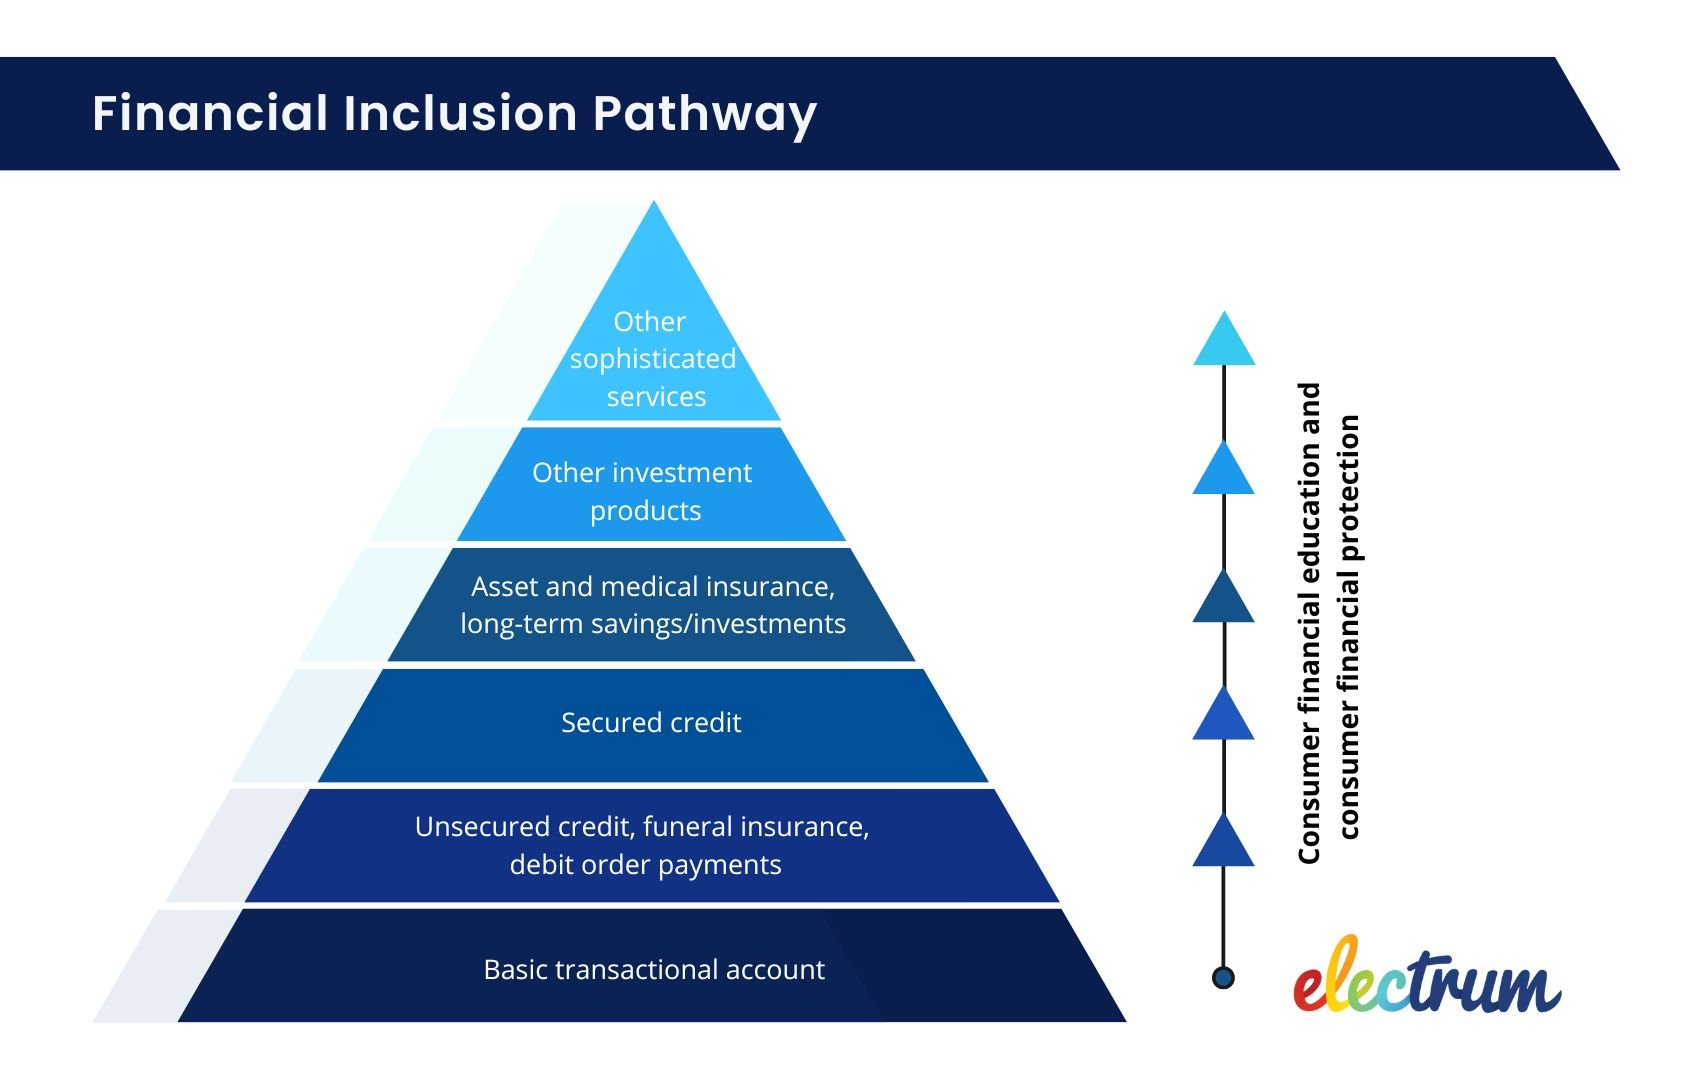 The financial inclusion pyramid